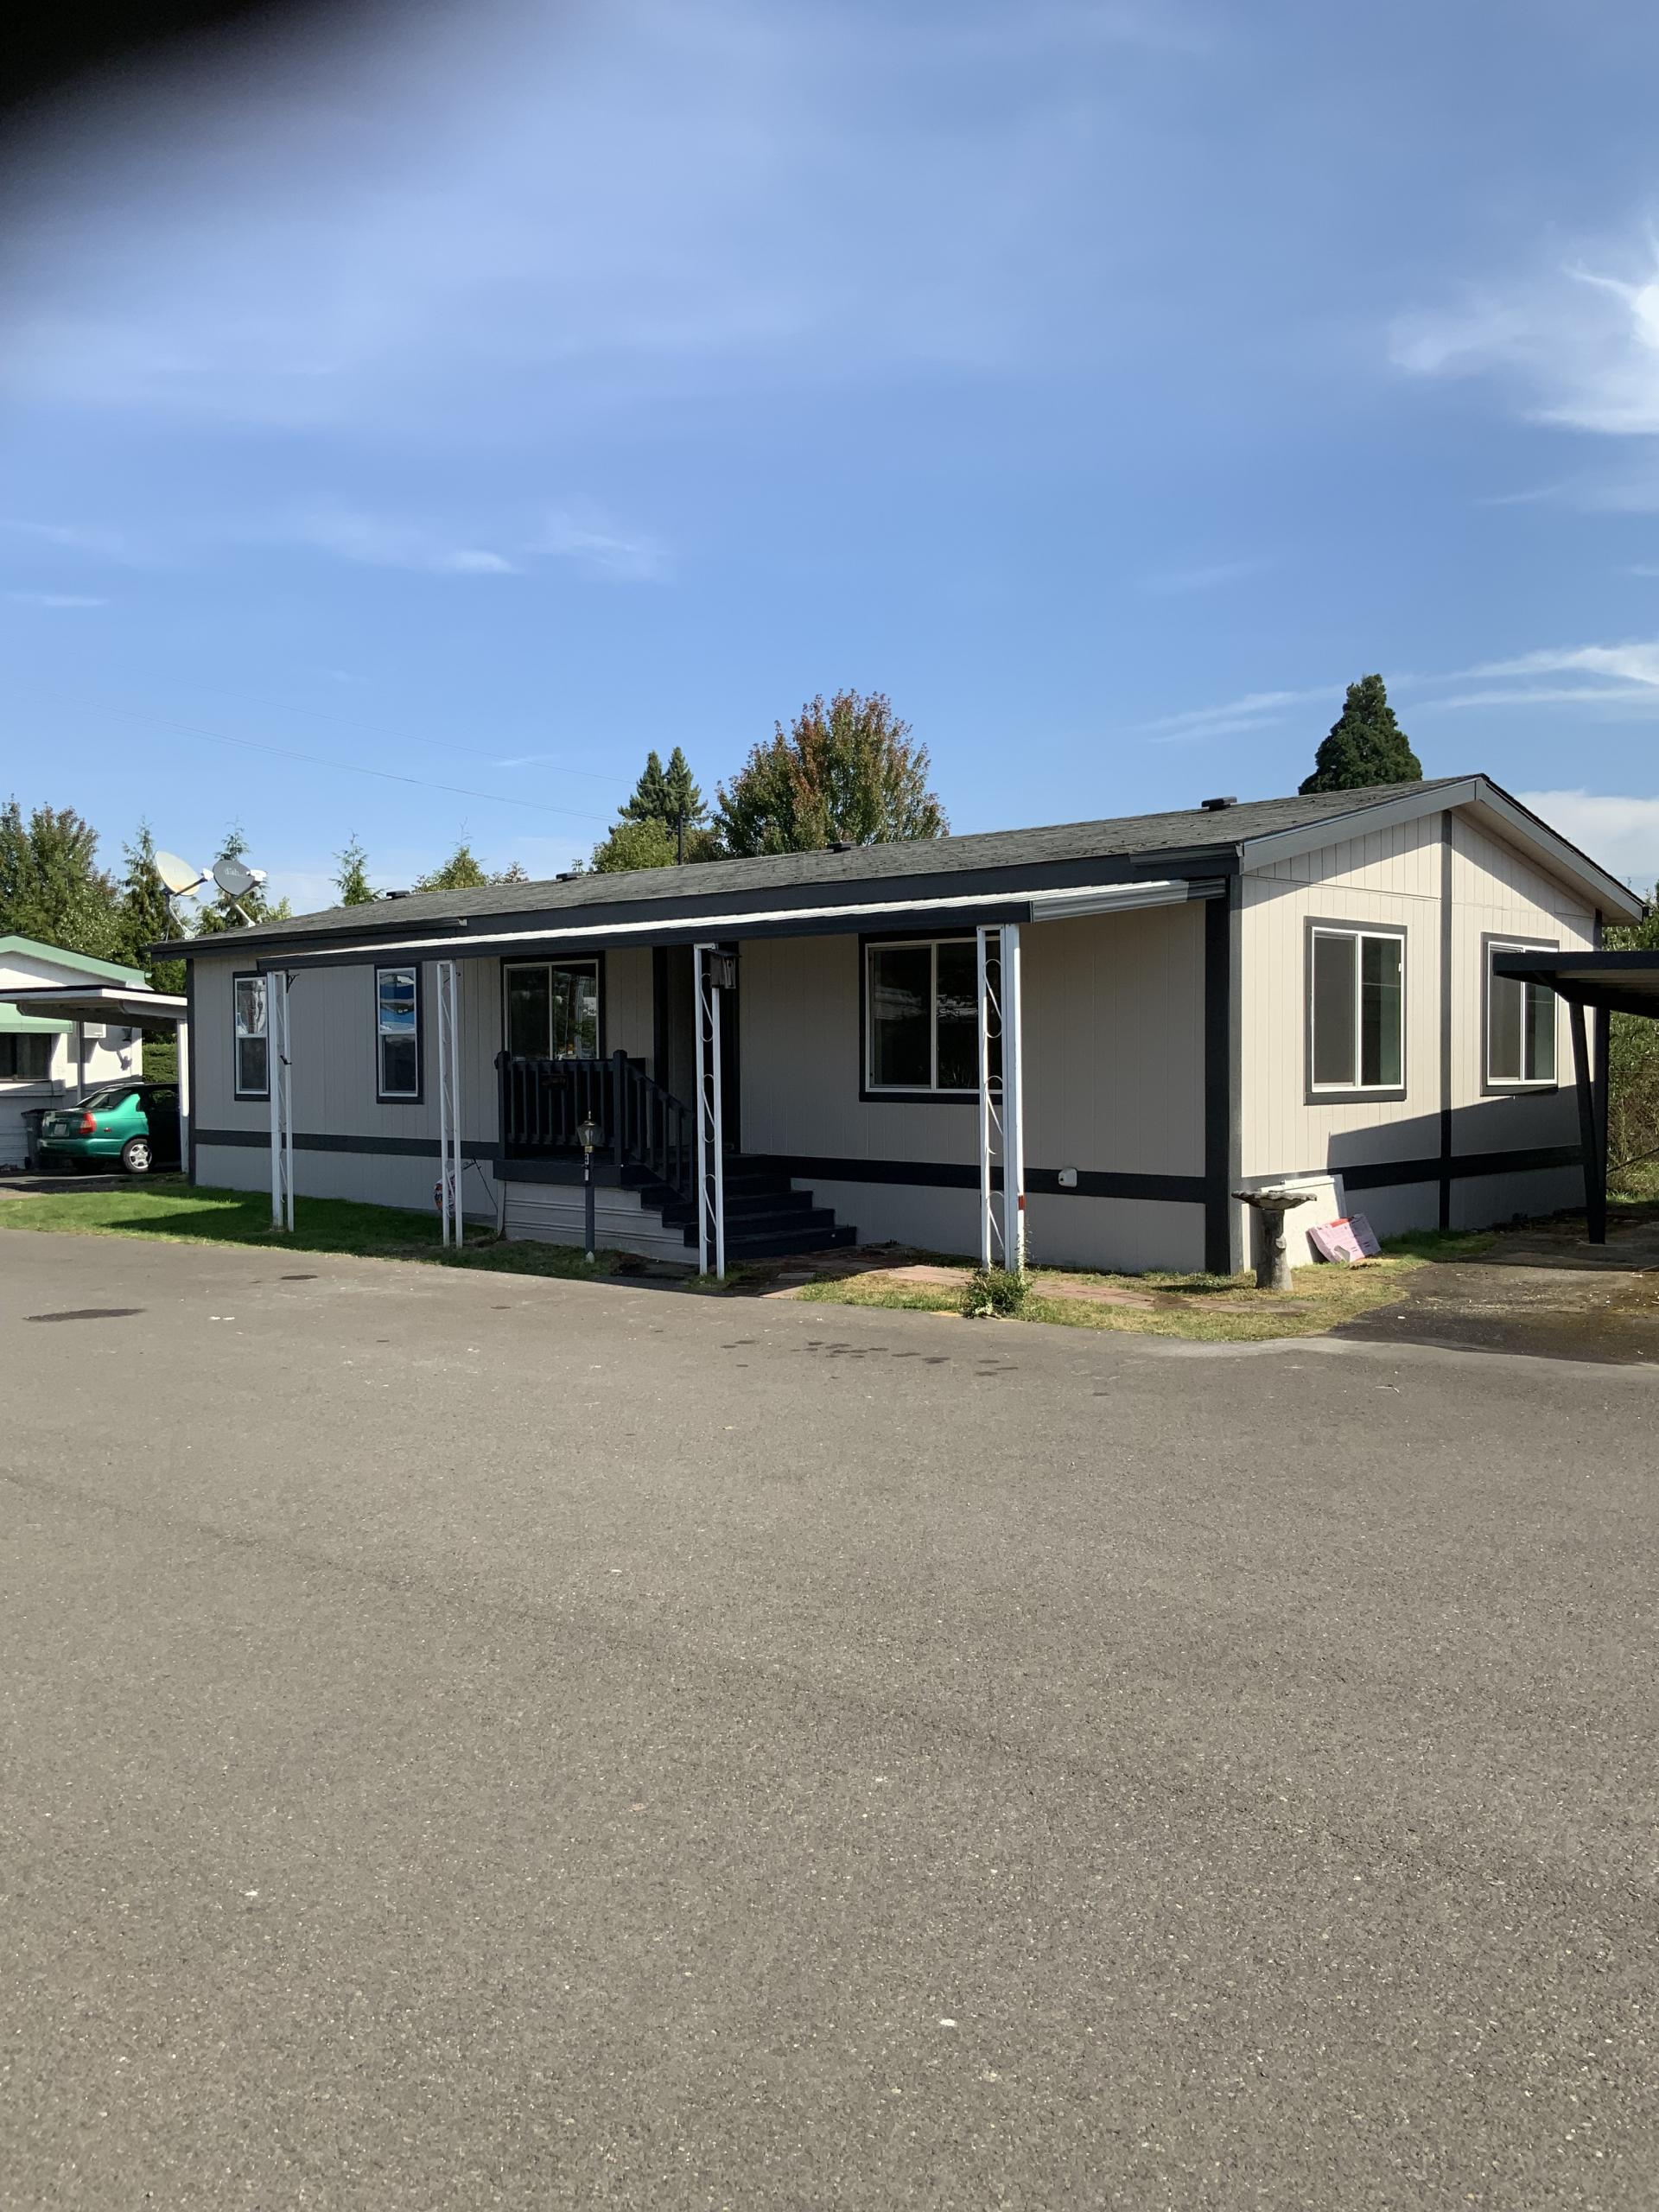 manufactured home for sale vancouver